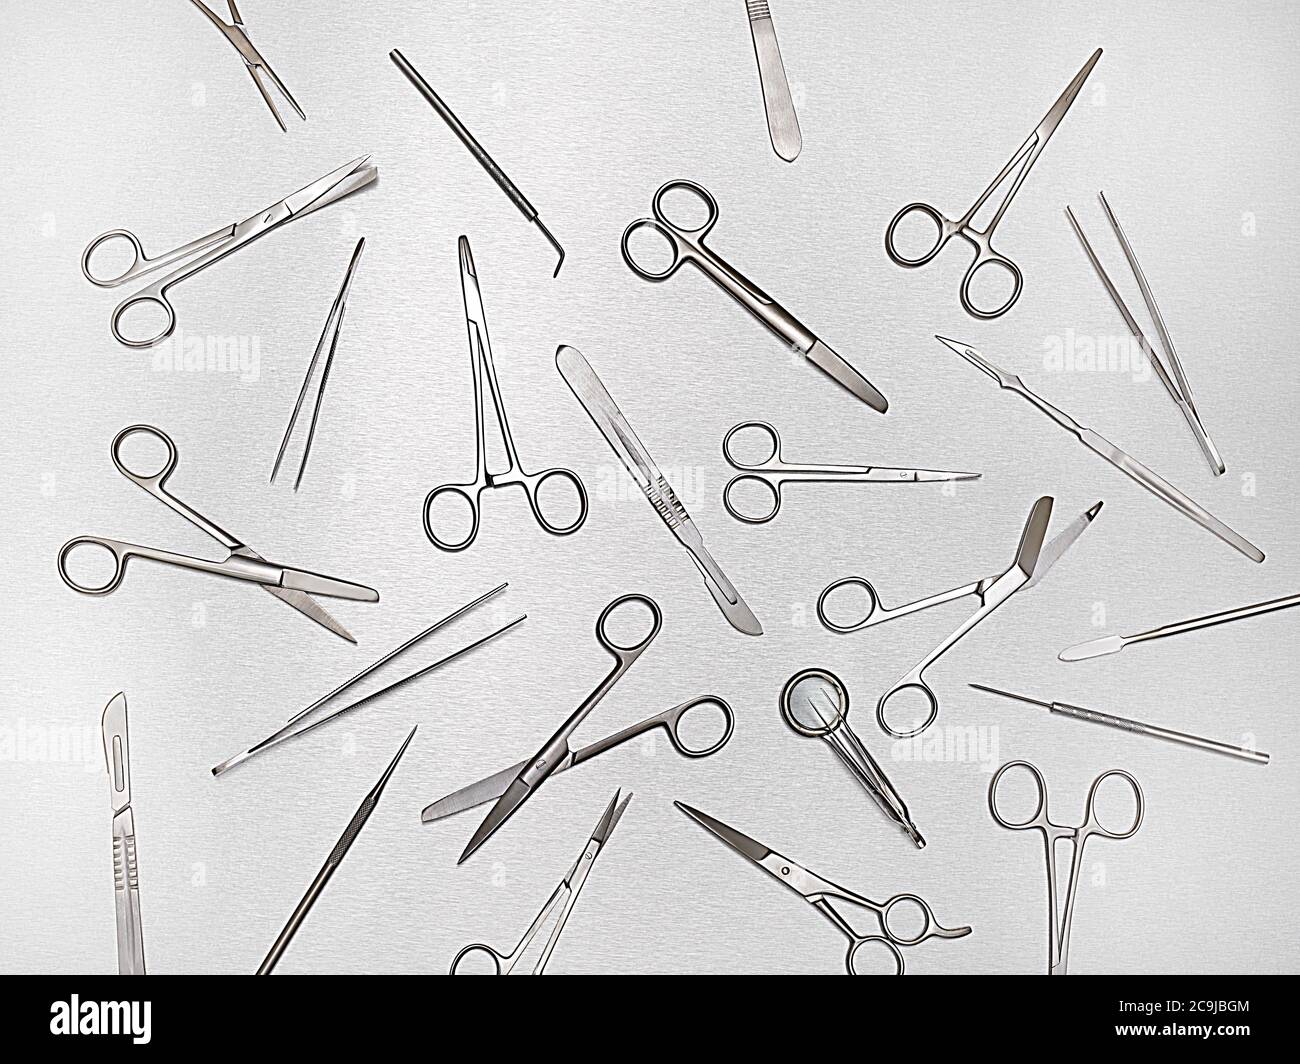 Surgical scissors against a grey background. Stock Photo